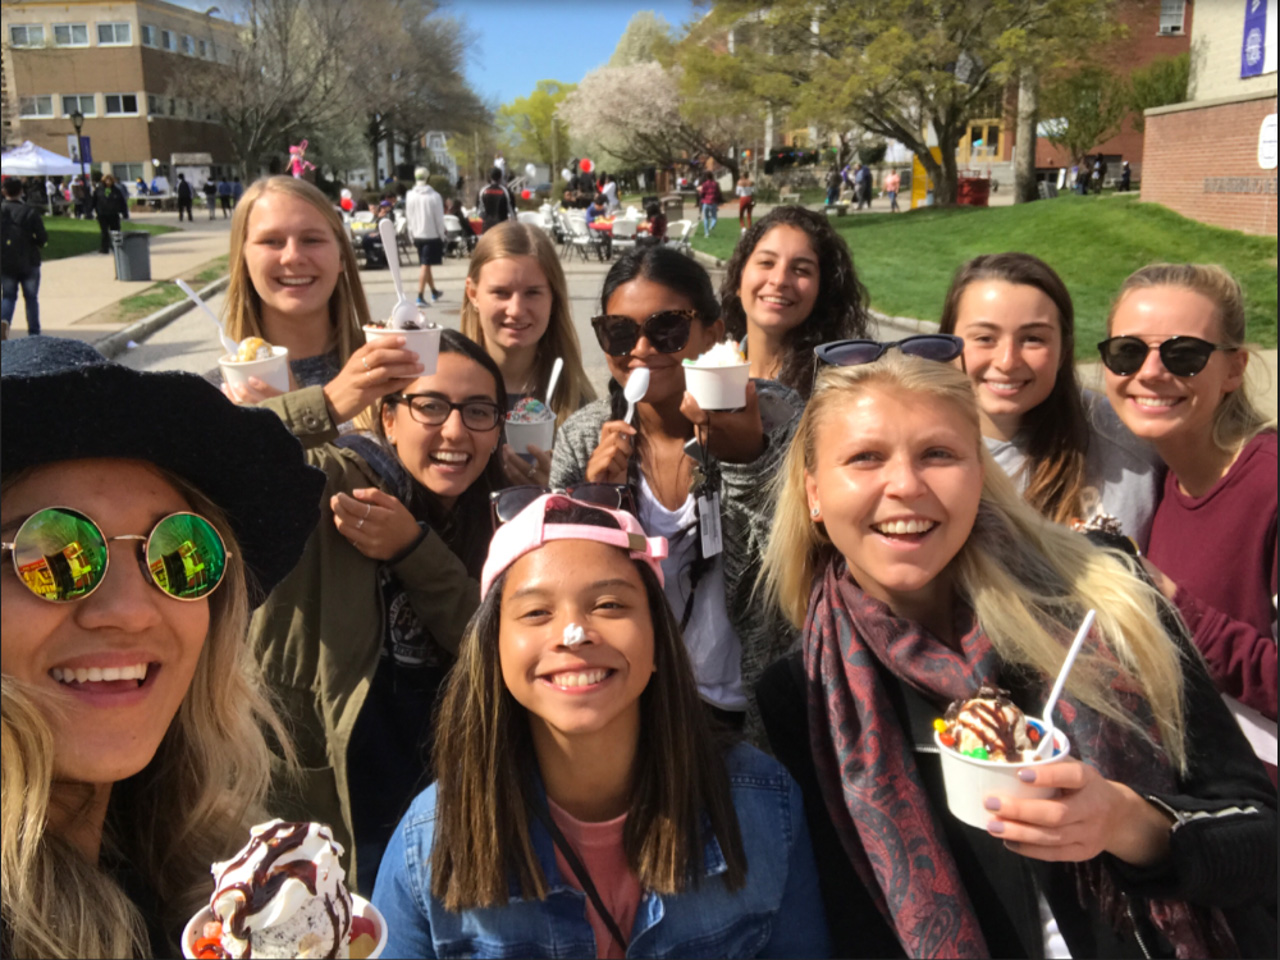 Students Having Fun at Event with Ice Cream